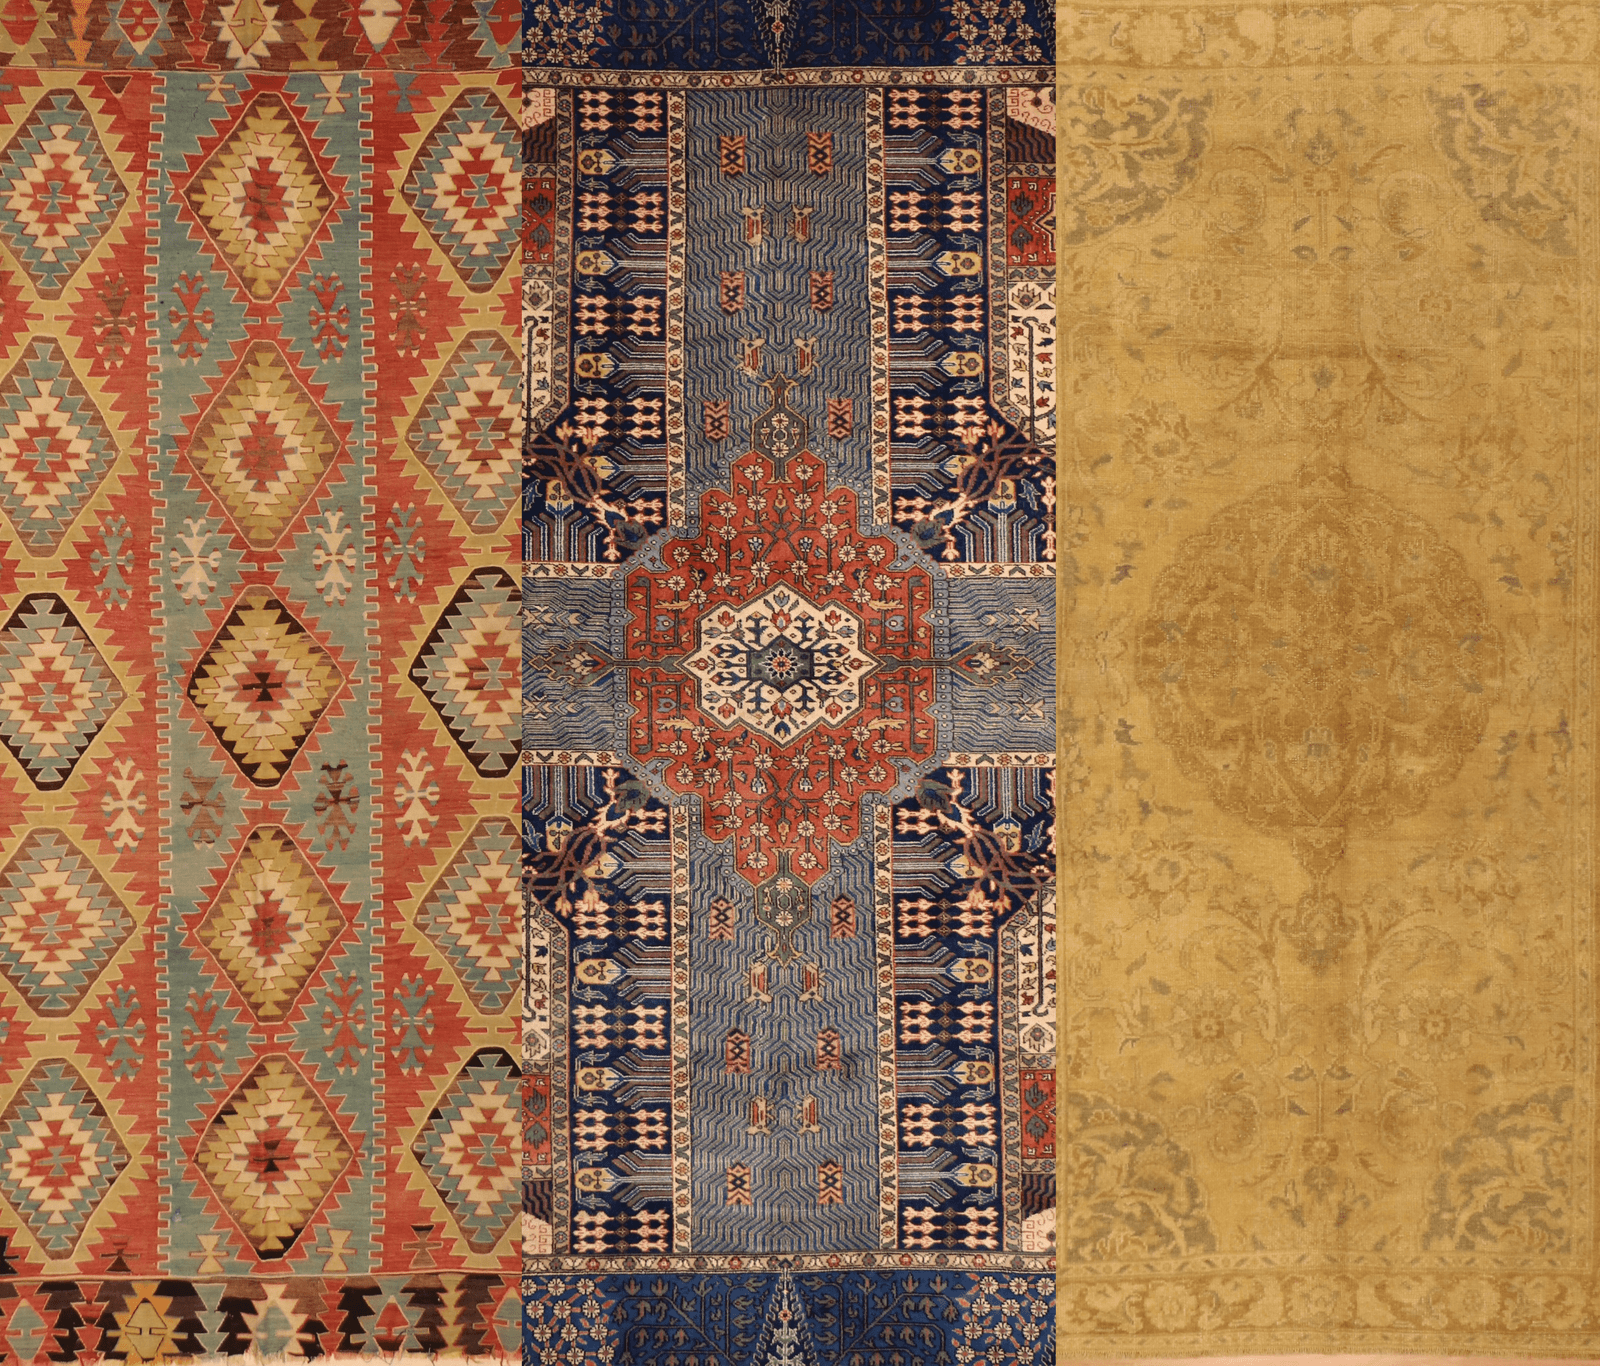 Our Antique Turkish Rugs in West Palm Beach